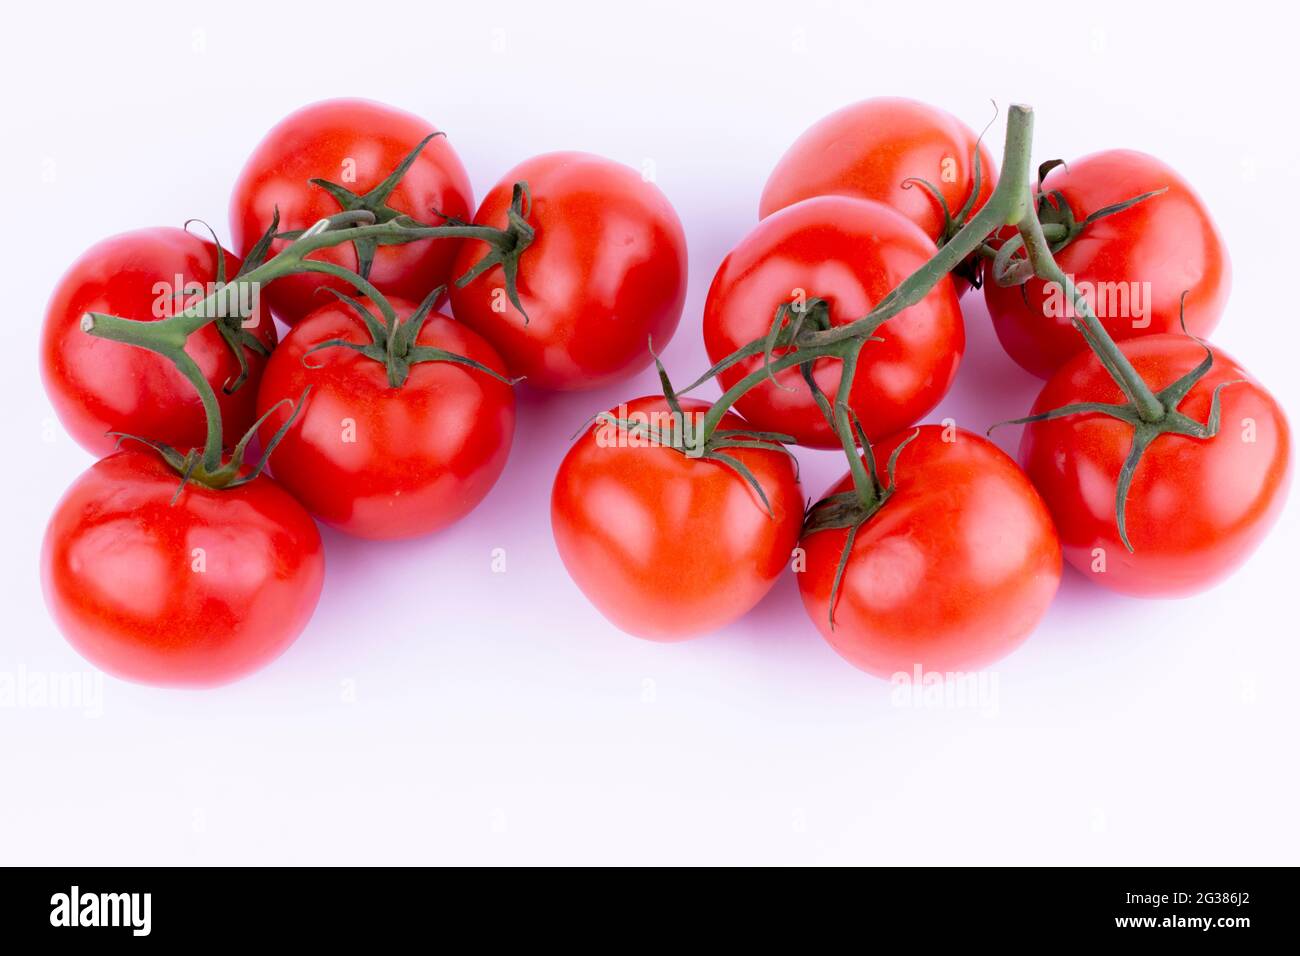 Red Tomato with Stem. The tomato is the edible berry of the plant Solanum lycopersicum, commonly known as a tomato plant. Andalucia, Spain, Europe Stock Photo